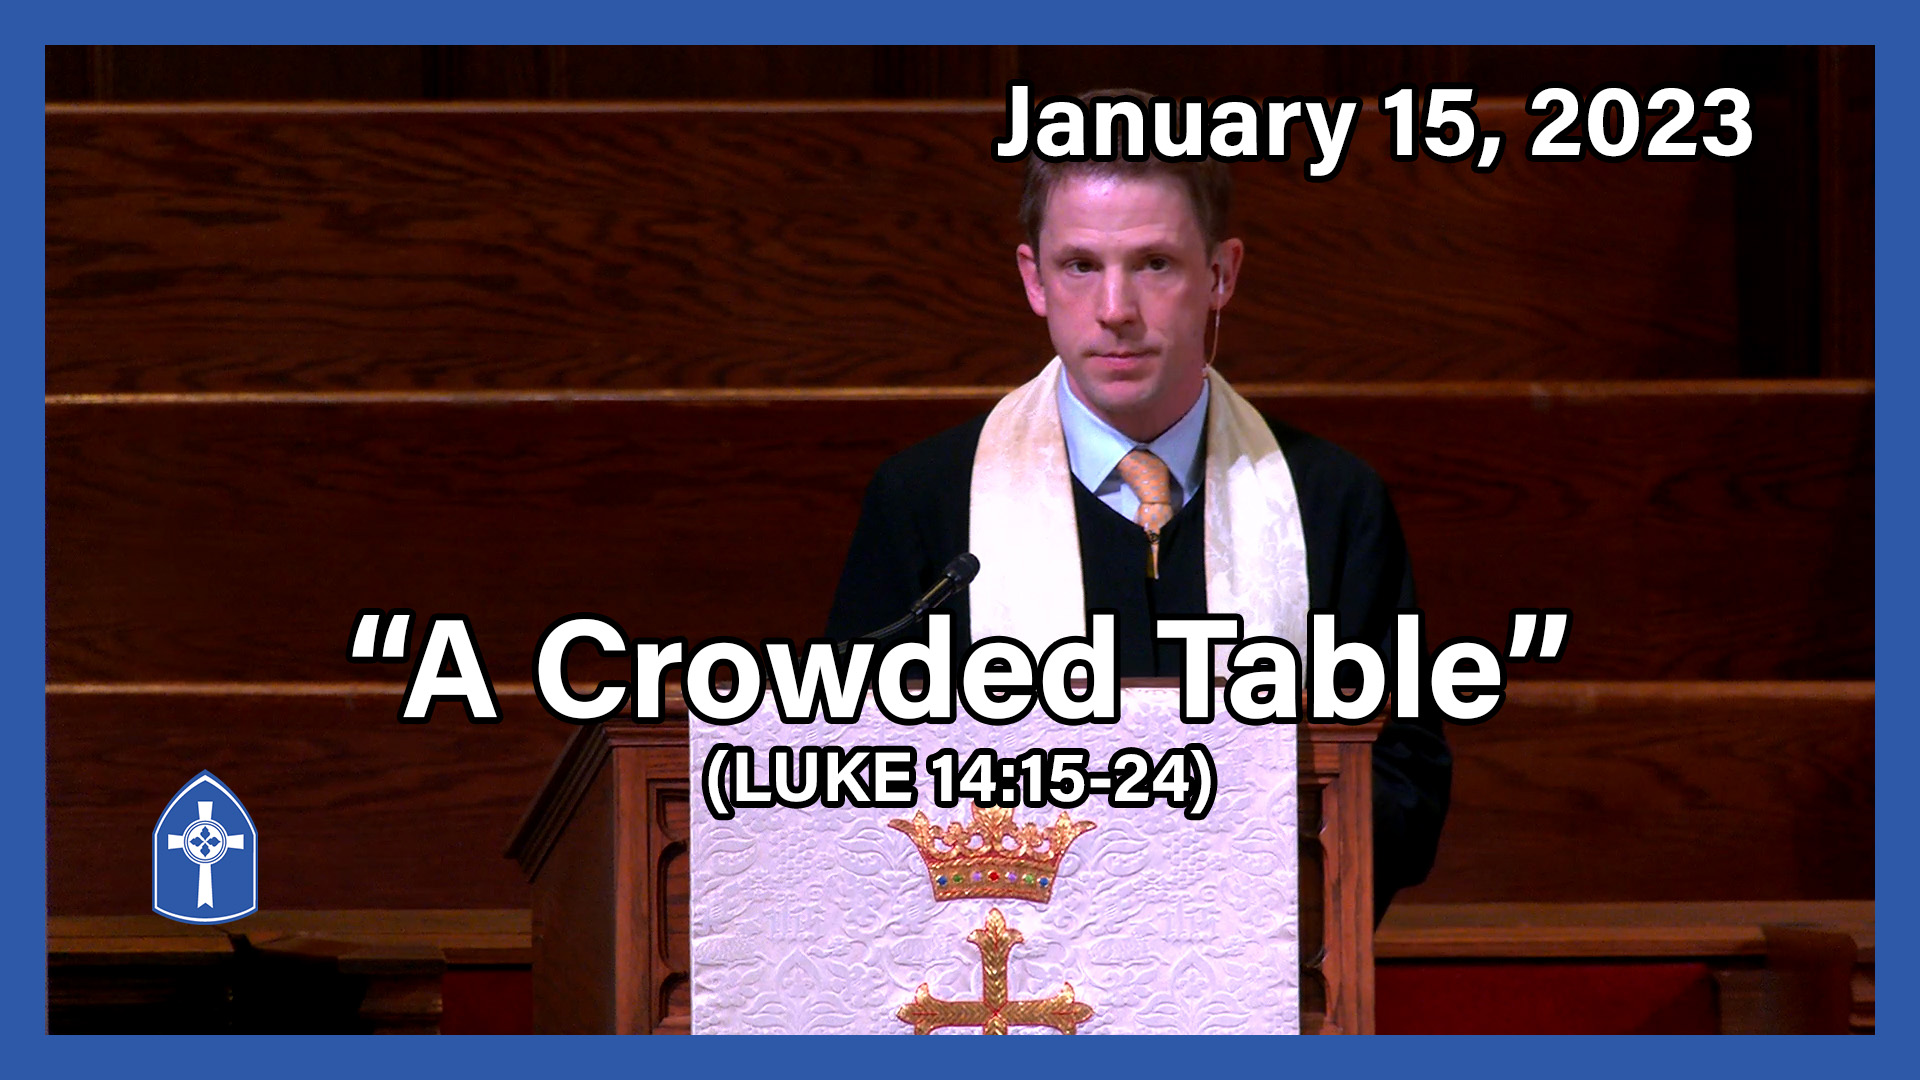 January 15 - A Crowded Table